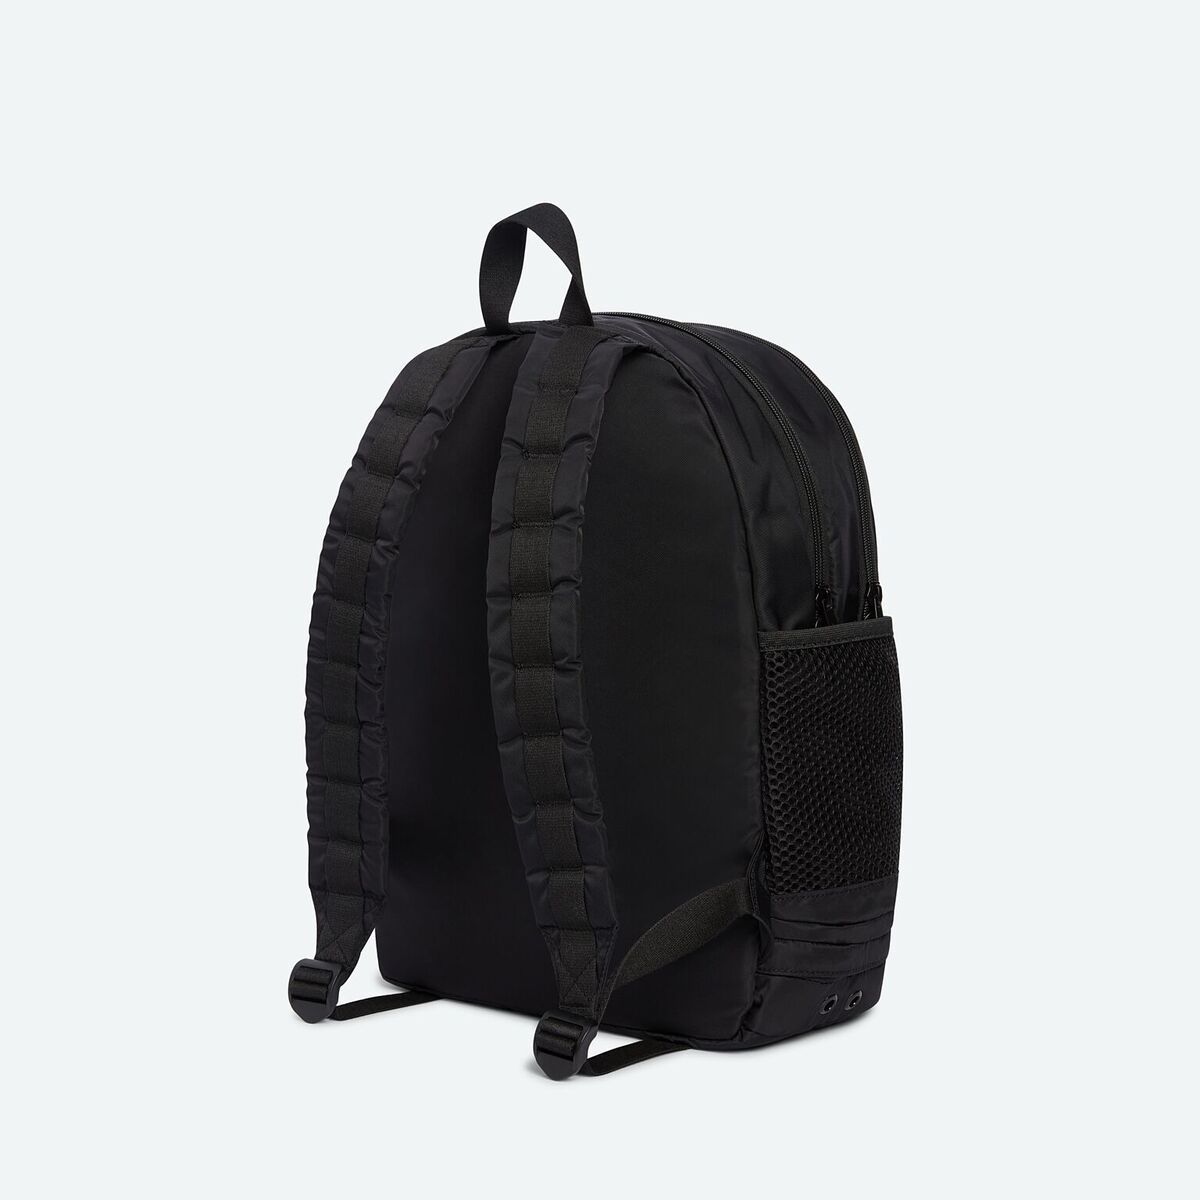 State's effortlessly stylish work-to-gym backpack.